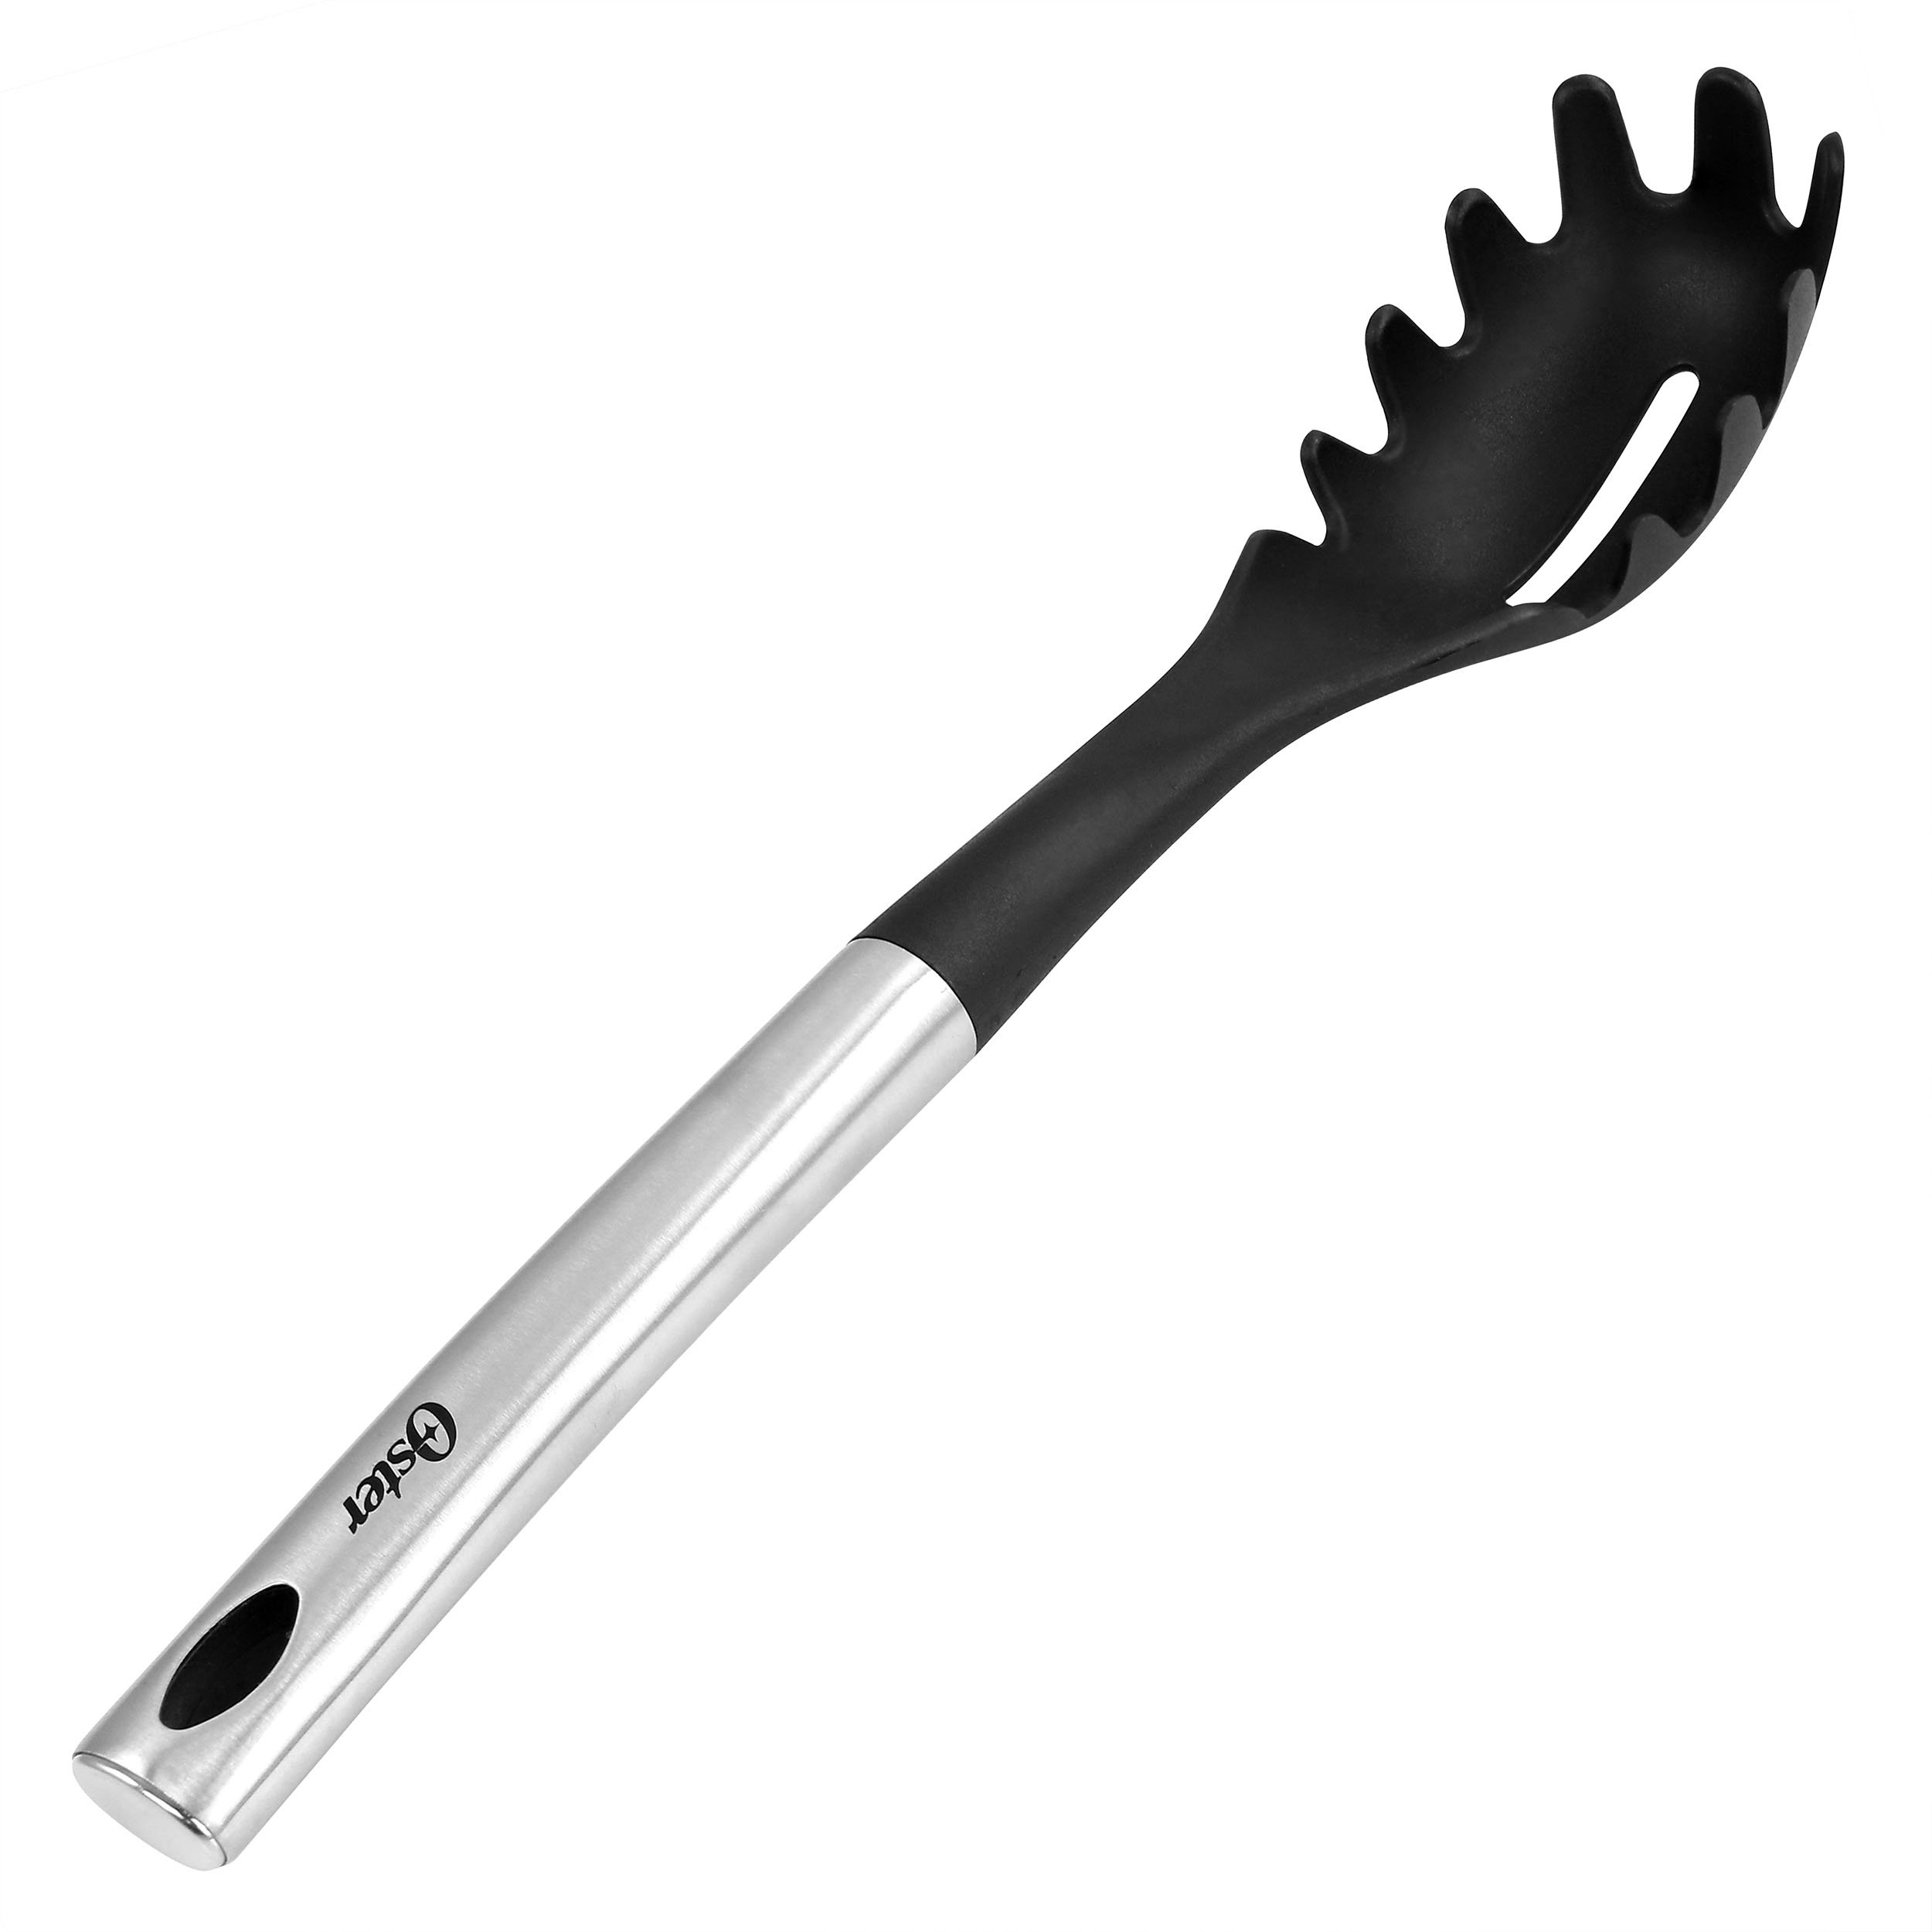 Frieling Dish Washing Brush with Stainless Steel Handle